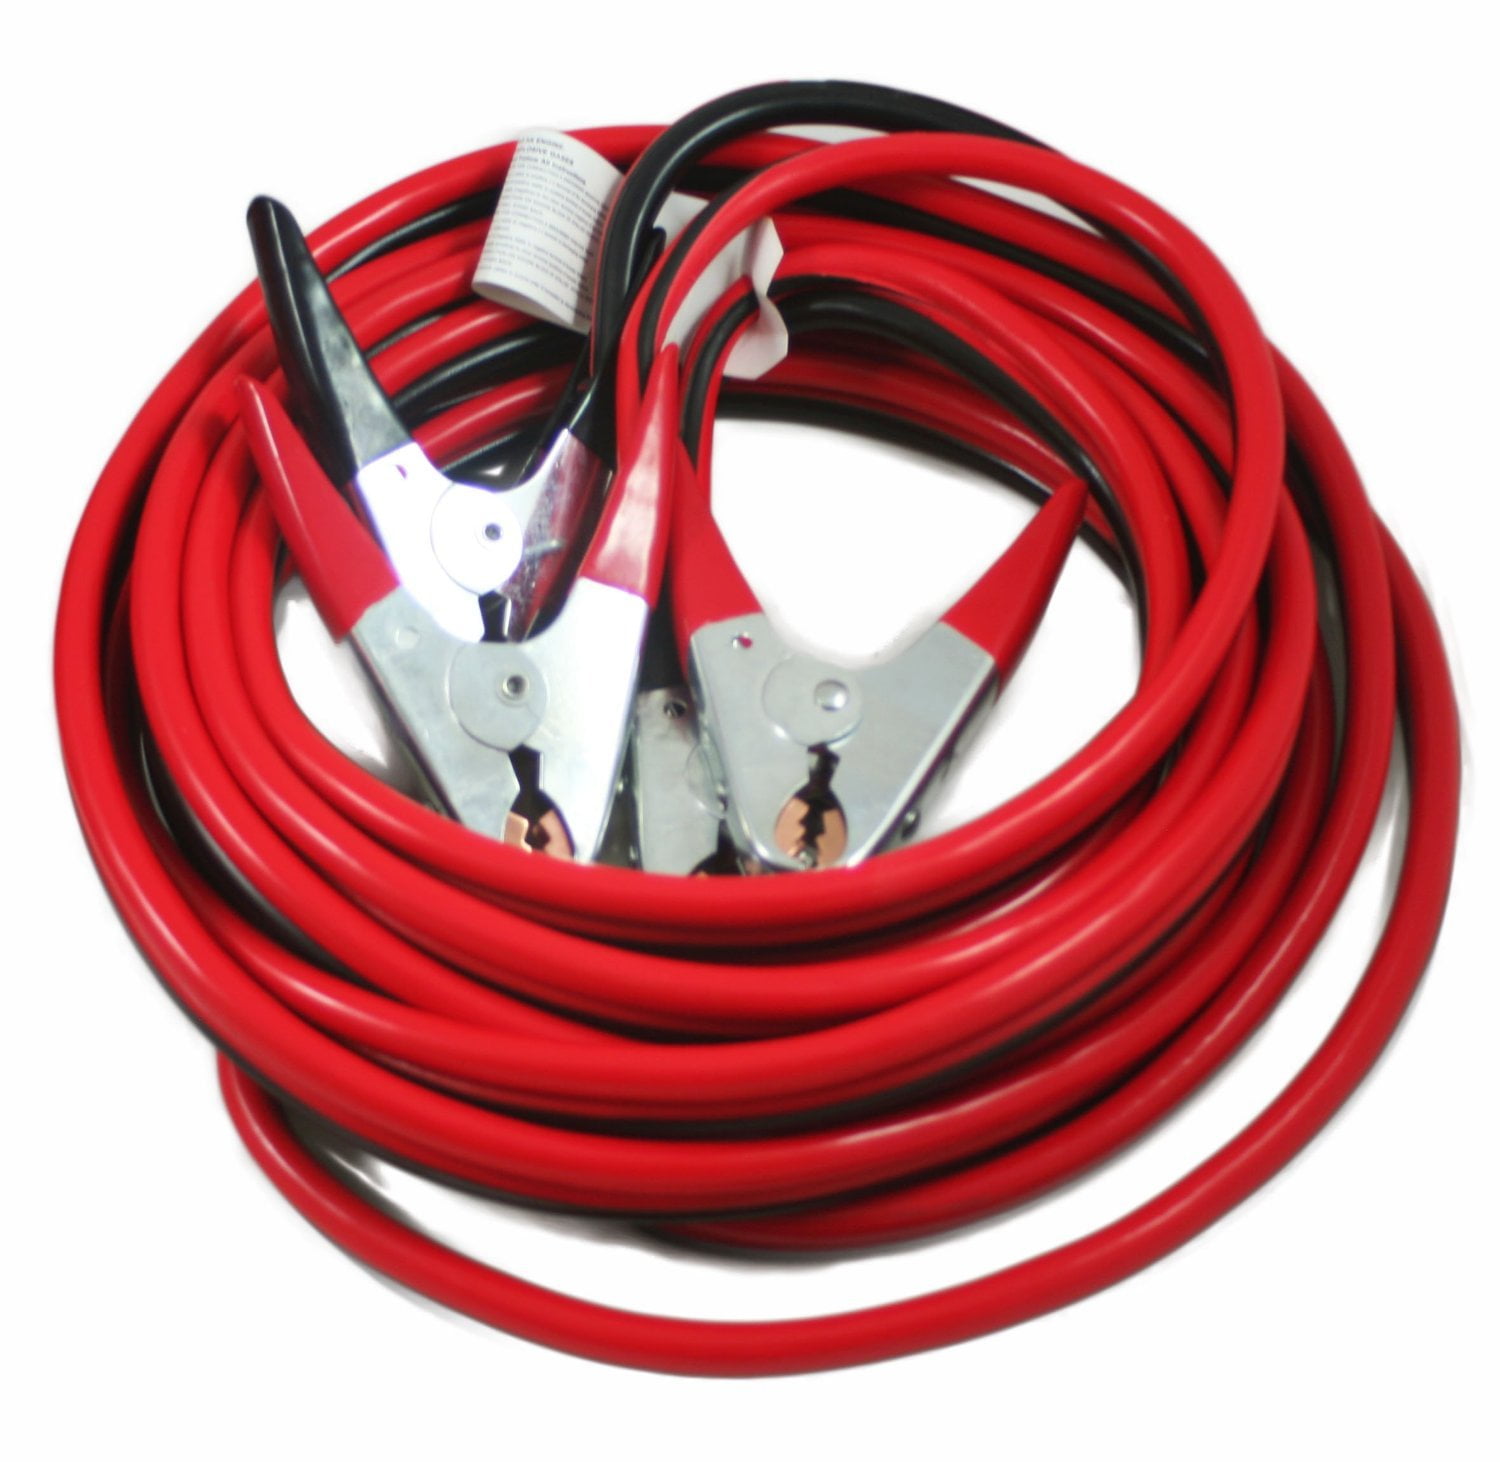 ABN Jumper Cables 25’ Feet Long 2-Gauge 600 AMP Motorcycle Car Booster Cables 